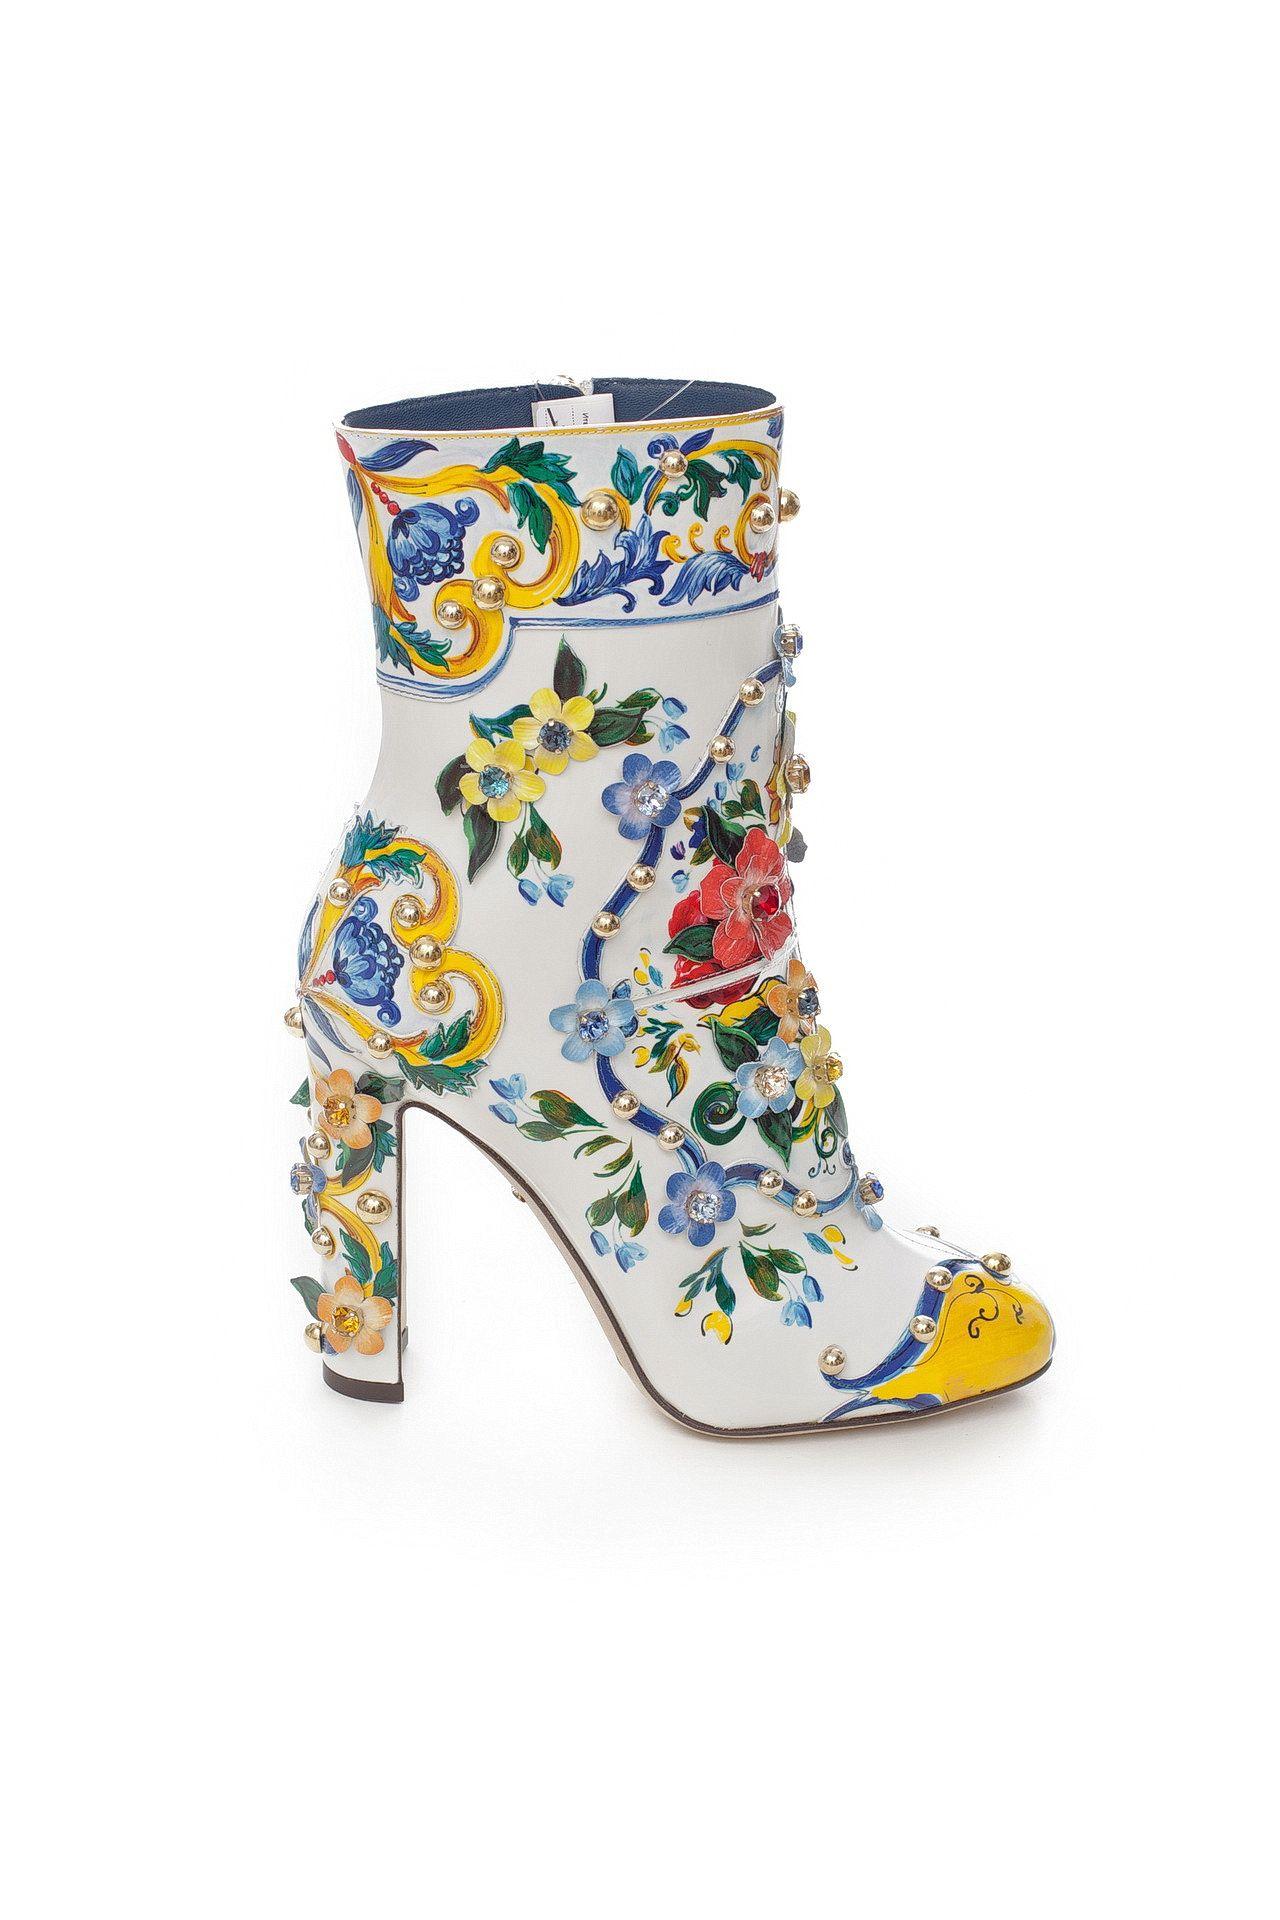 Beige Rare! Dolce & Gabbana Majolica Painted Leather Embellished Ankle Boots 39 - 9